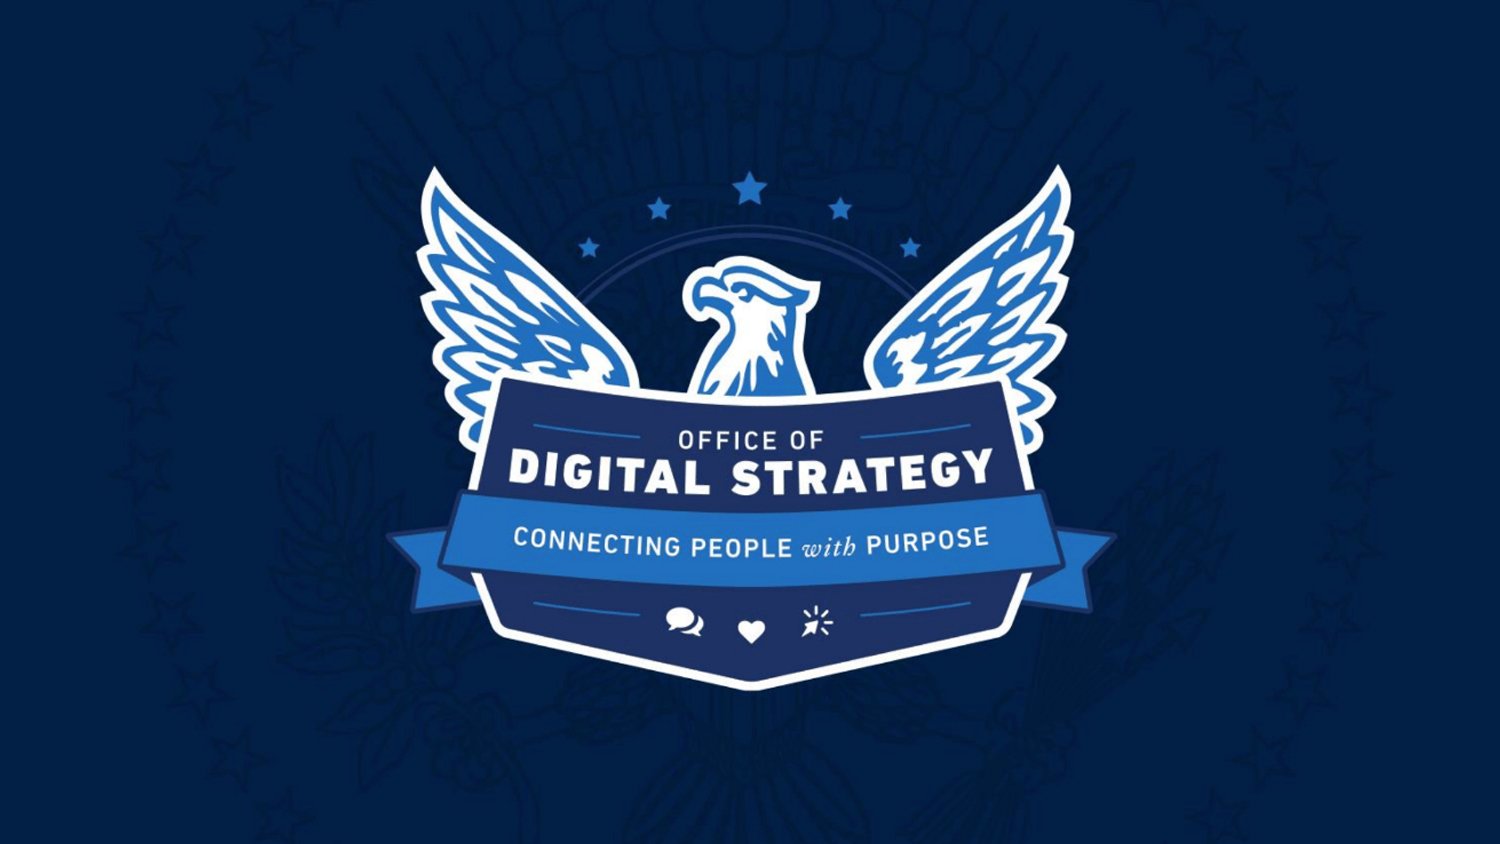 White House Office of Digital Strategy - The seal for the Obama White House Office of Digital Strategy. Creative direction from Ashleigh Axios and design from James Hobbs.